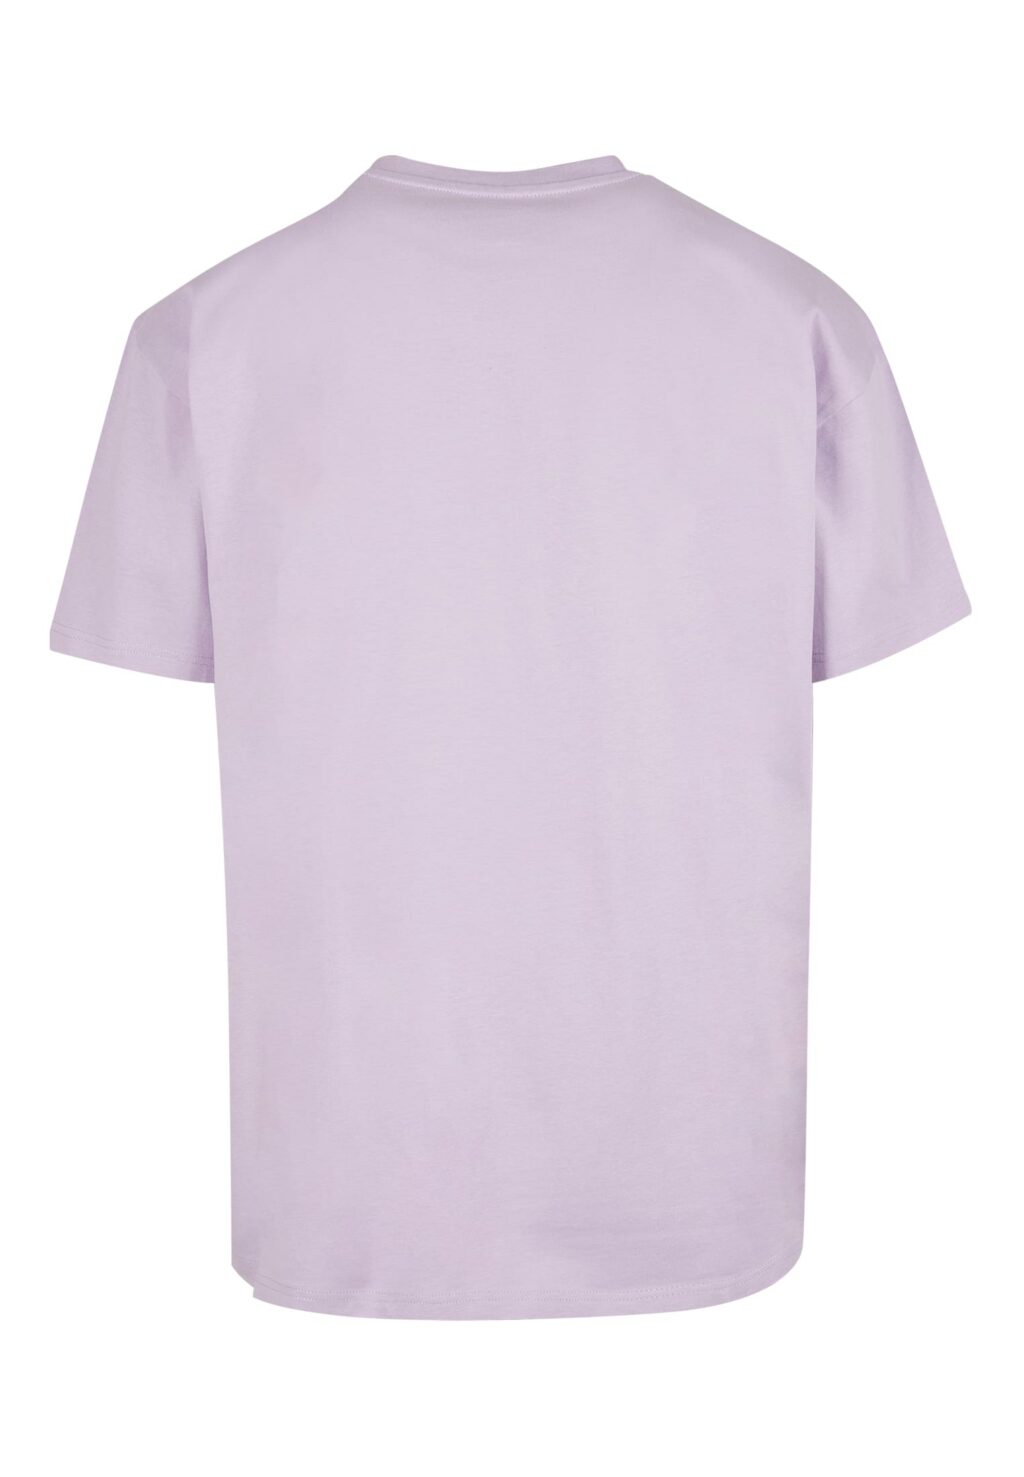 L.A. College Oversize Tee lilac MT2462